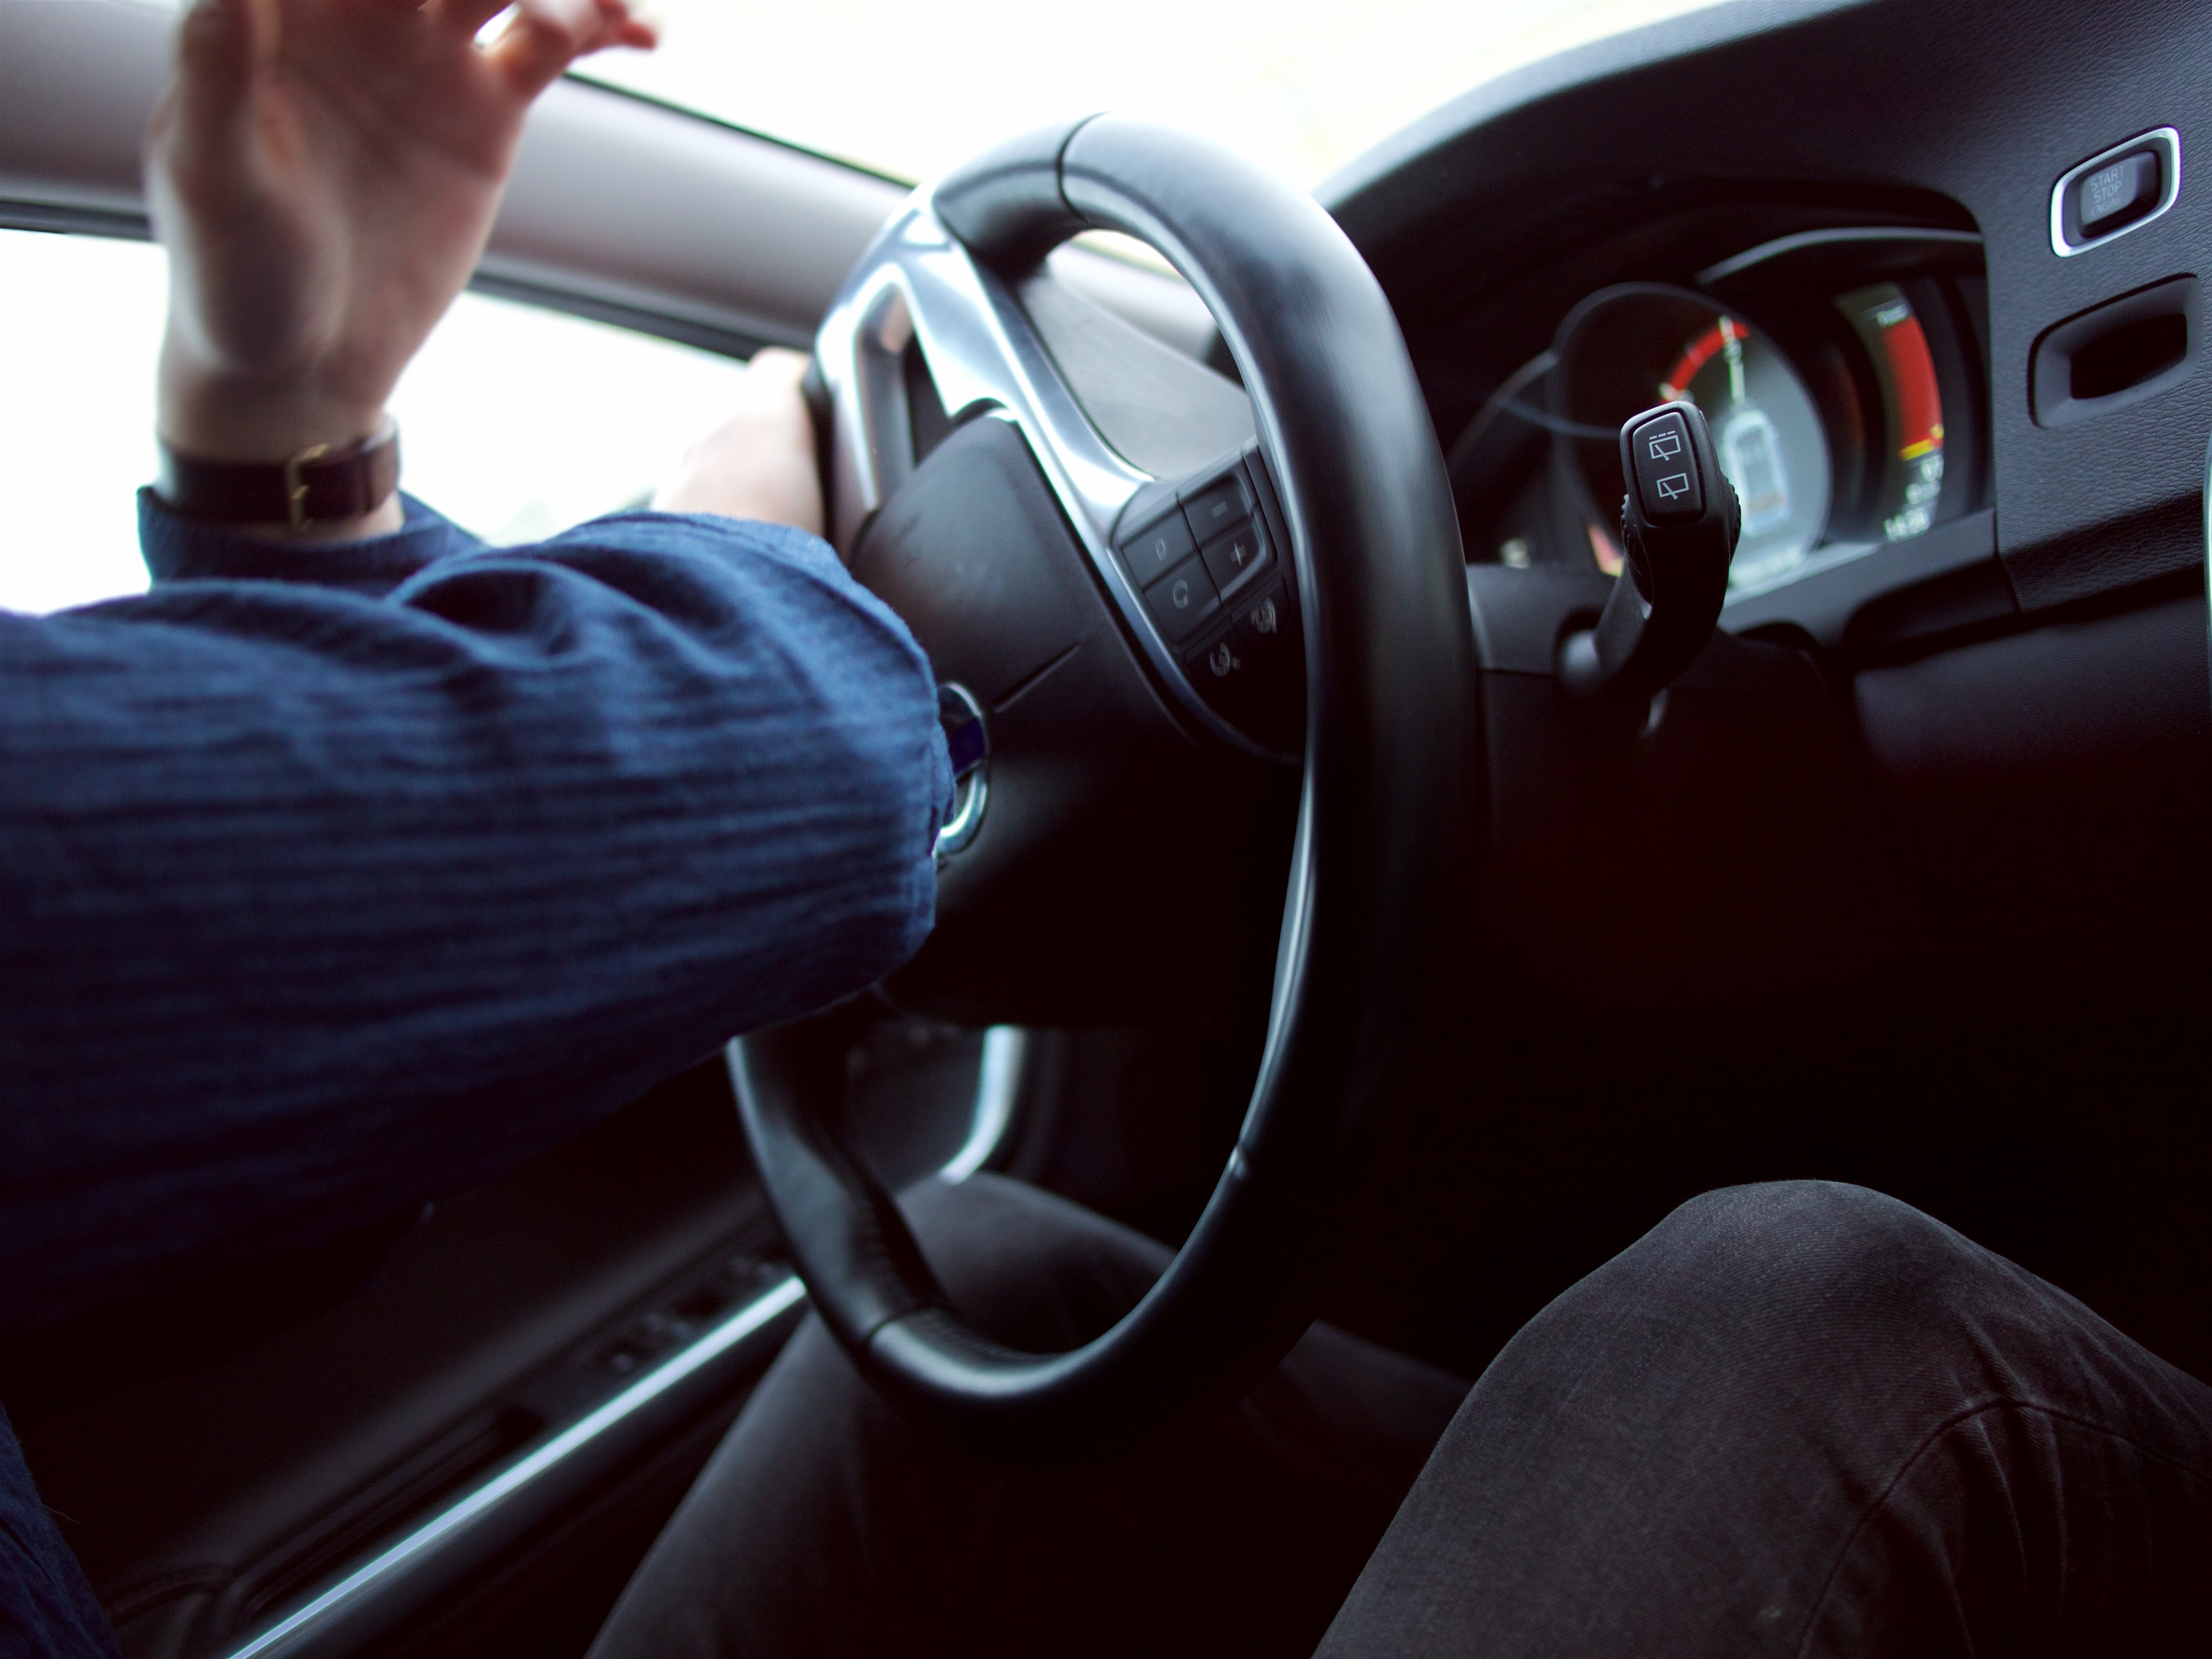 Explore how to sue for negligence following a texting-while-driving accident and secure the compensation you deserve in this in-depth guide.